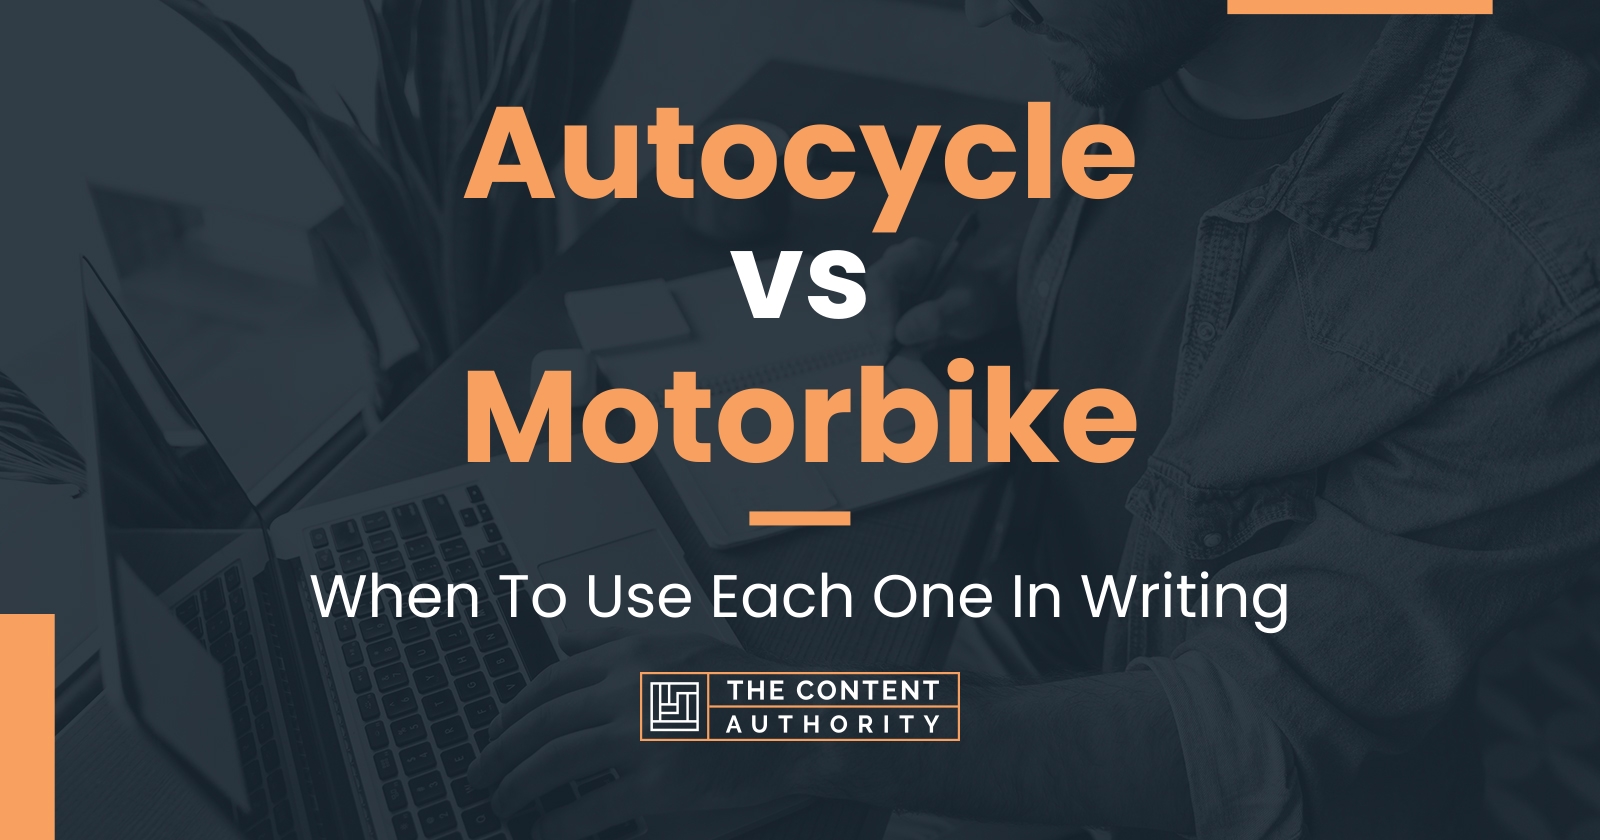 Autocycle vs Motorbike: When To Use Each One In Writing